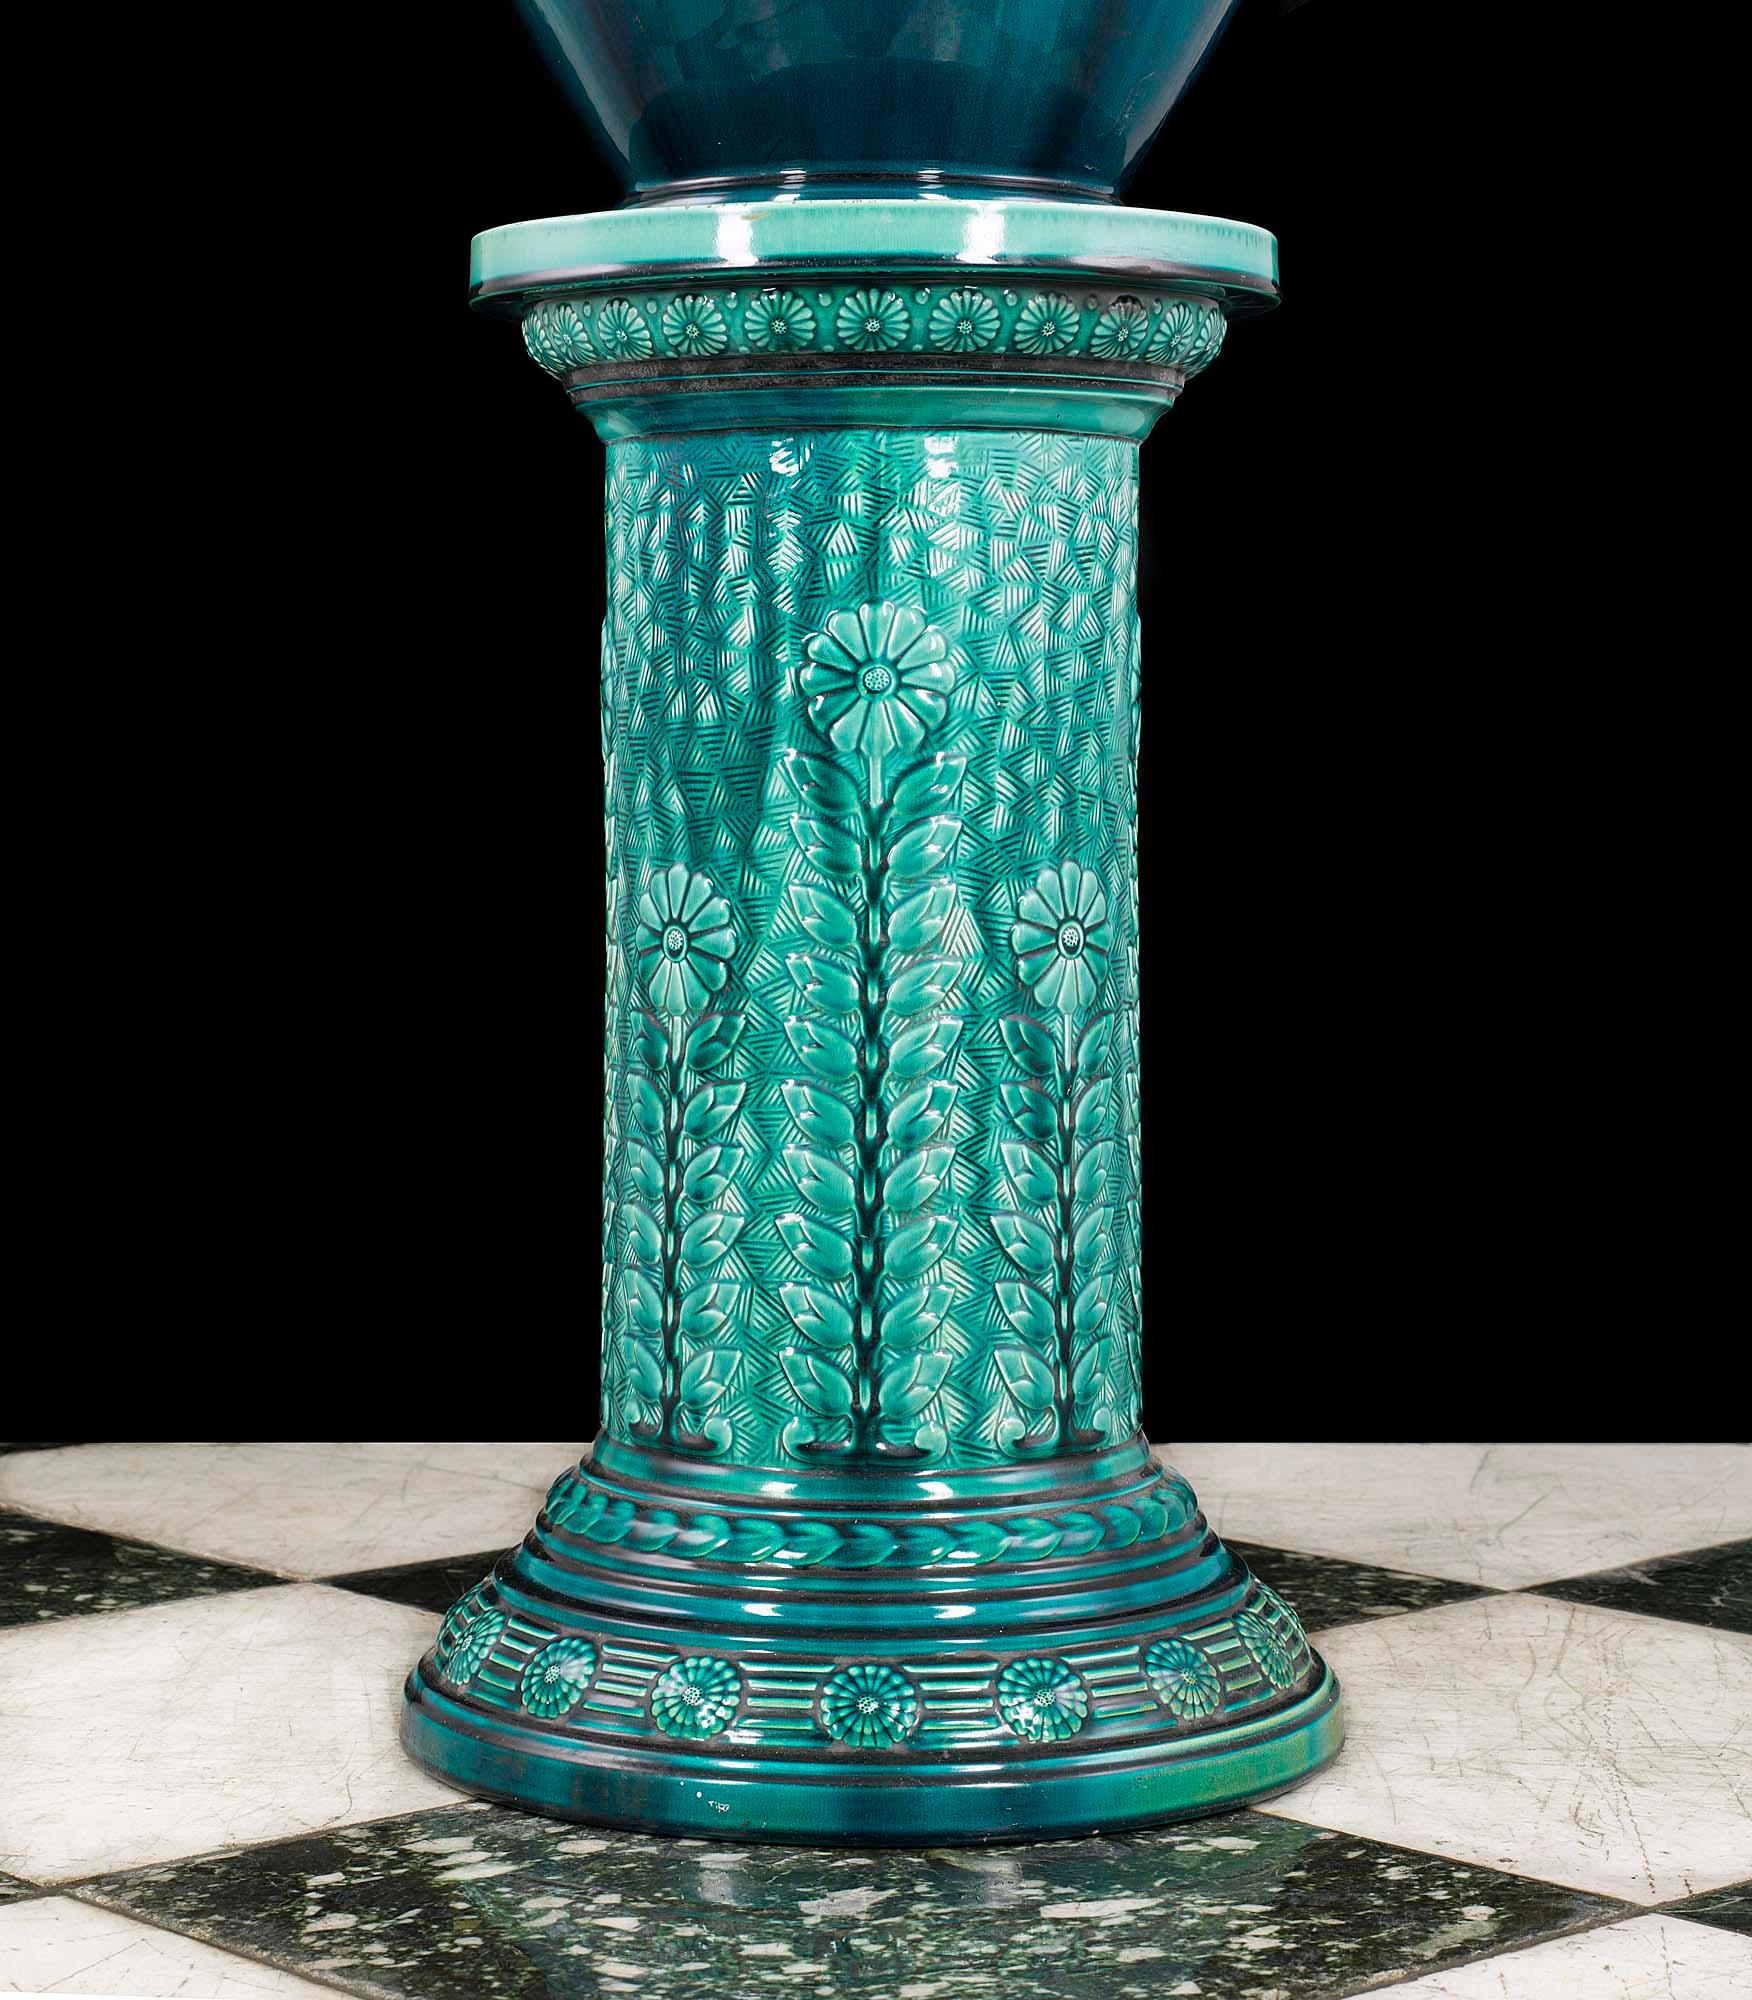 Glazed Turquoise Ceramic Jardinière and Stand Designed by Christopher Dresser 3